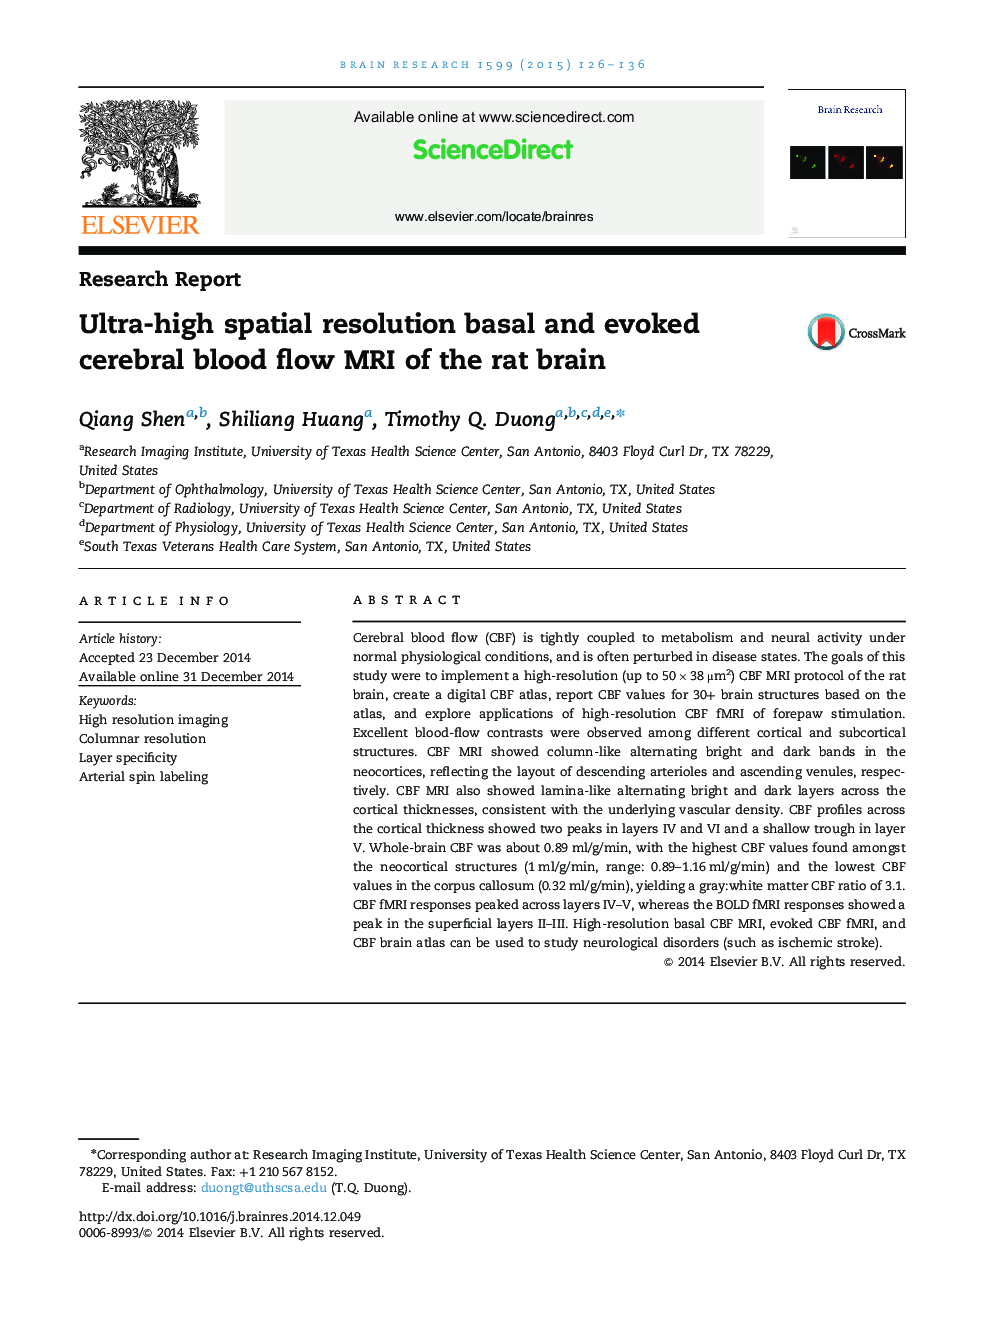 Ultra-high spatial resolution basal and evoked cerebral blood flow MRI of the rat brain